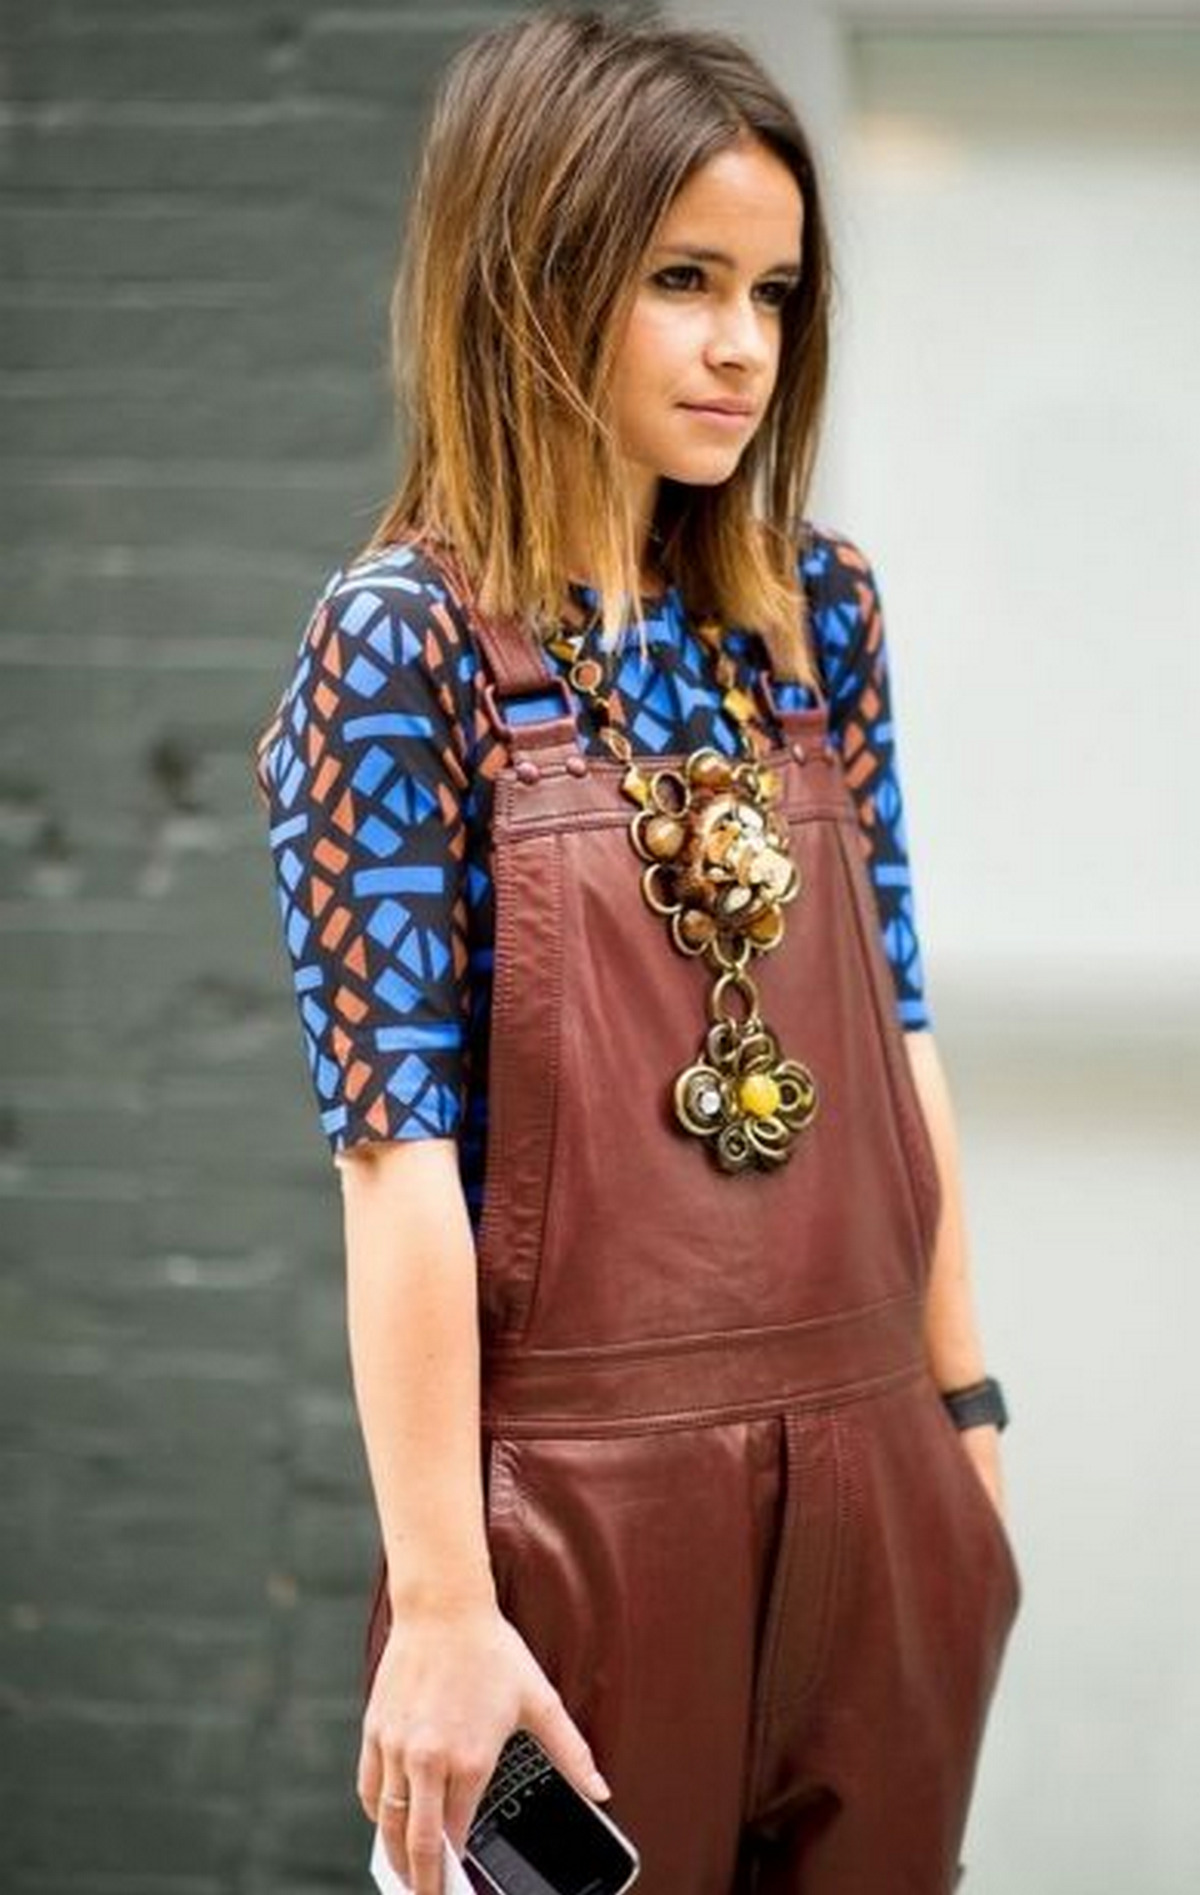 Blue Patterned Top With Brown Leather Overalls